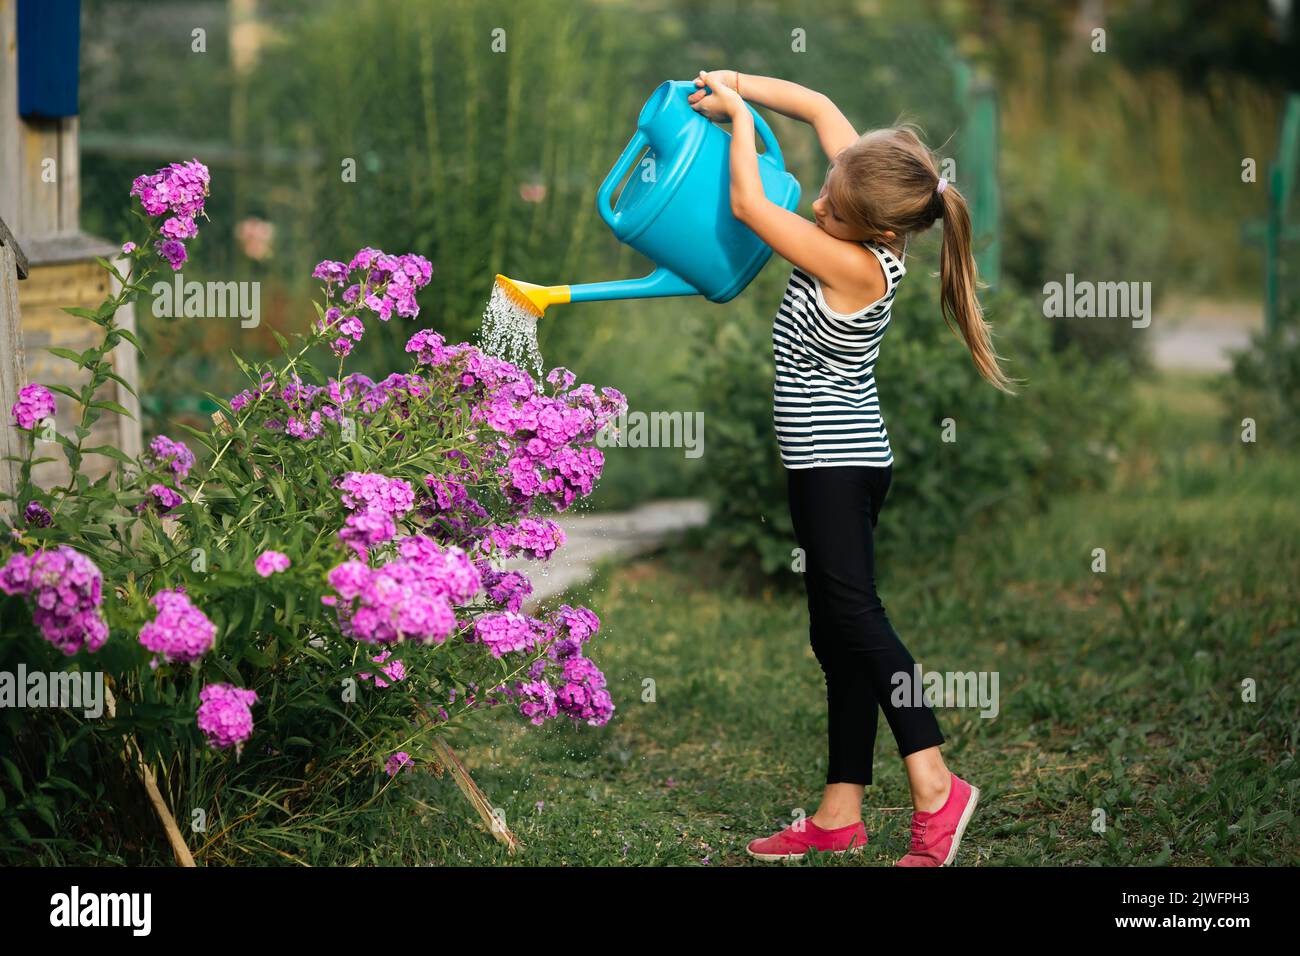 A girl is watering flowers from a watering can outside. Stock Photo